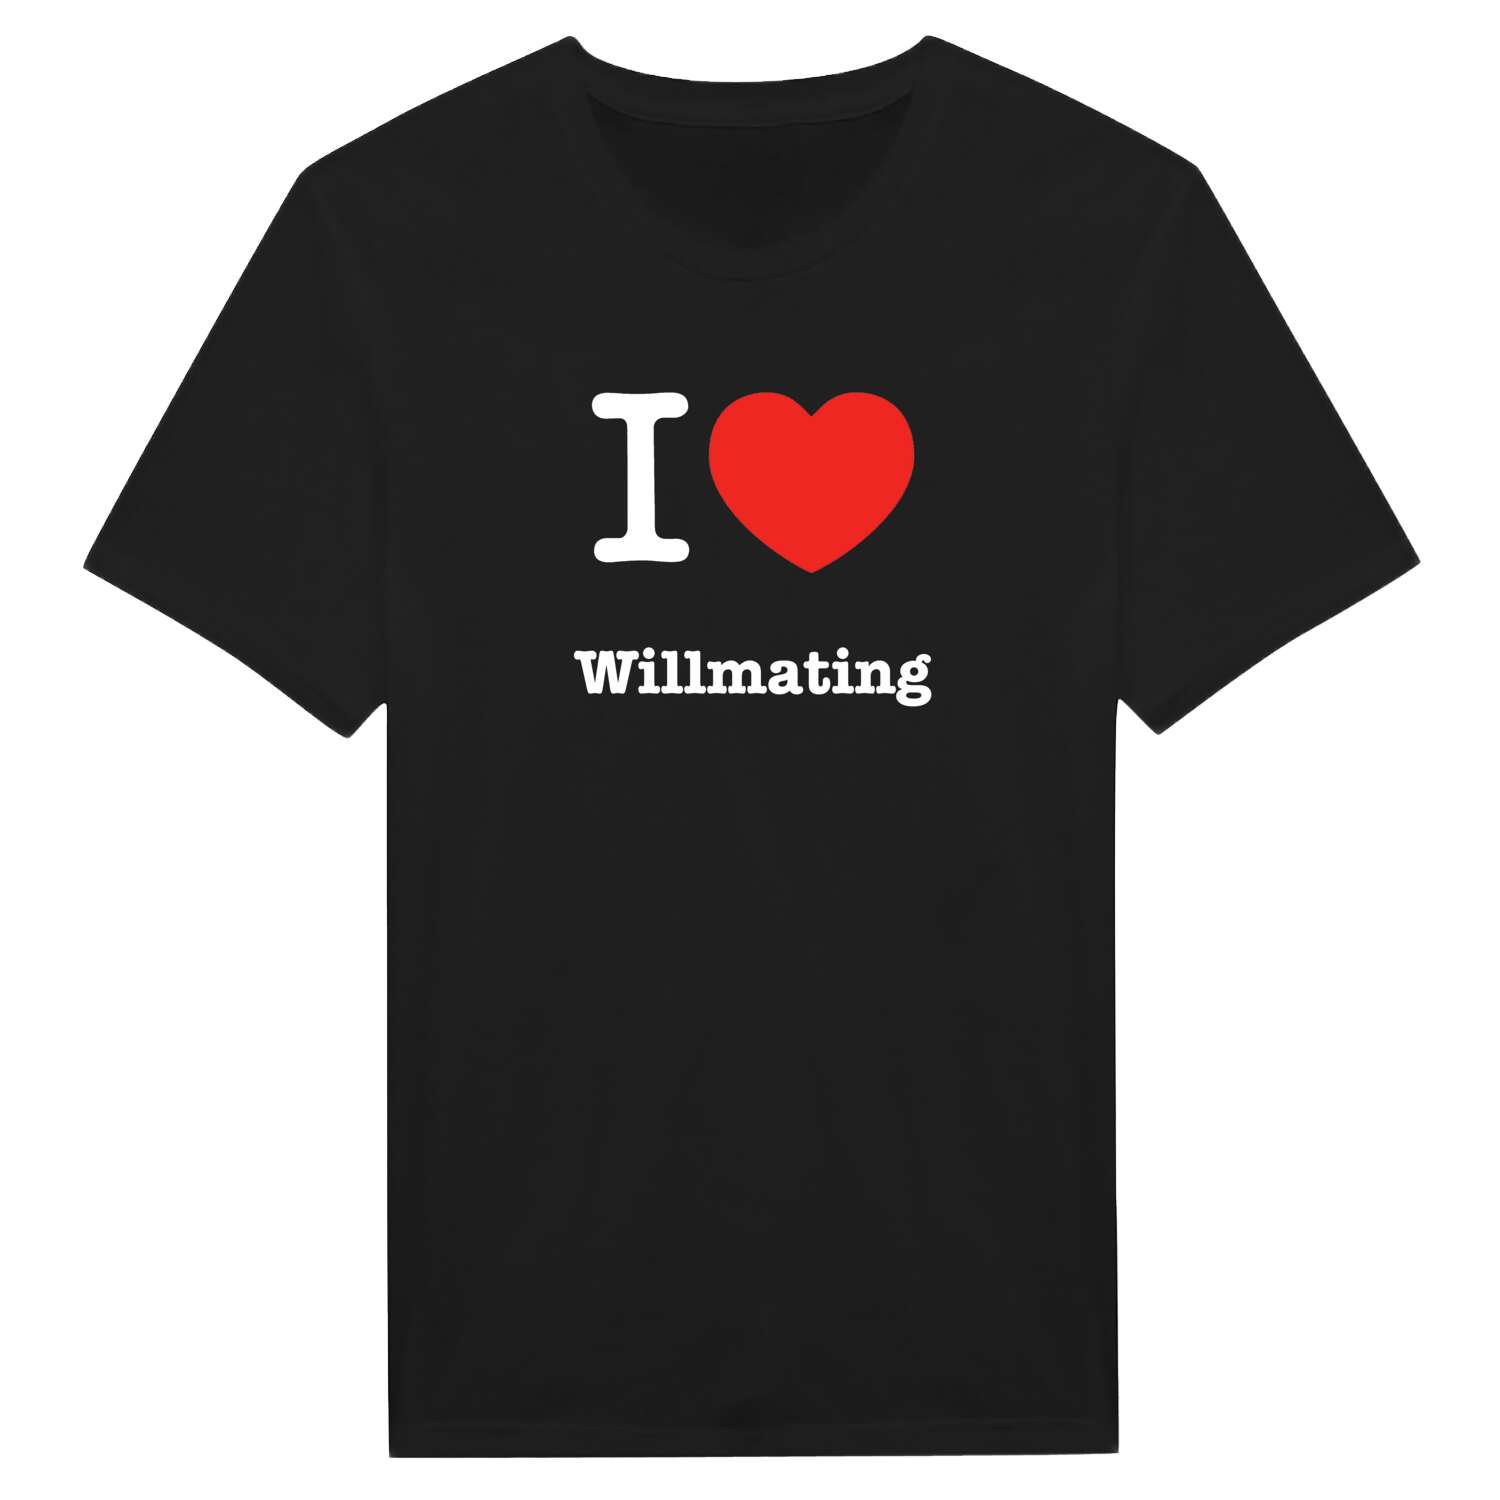 Willmating T-Shirt »I love«